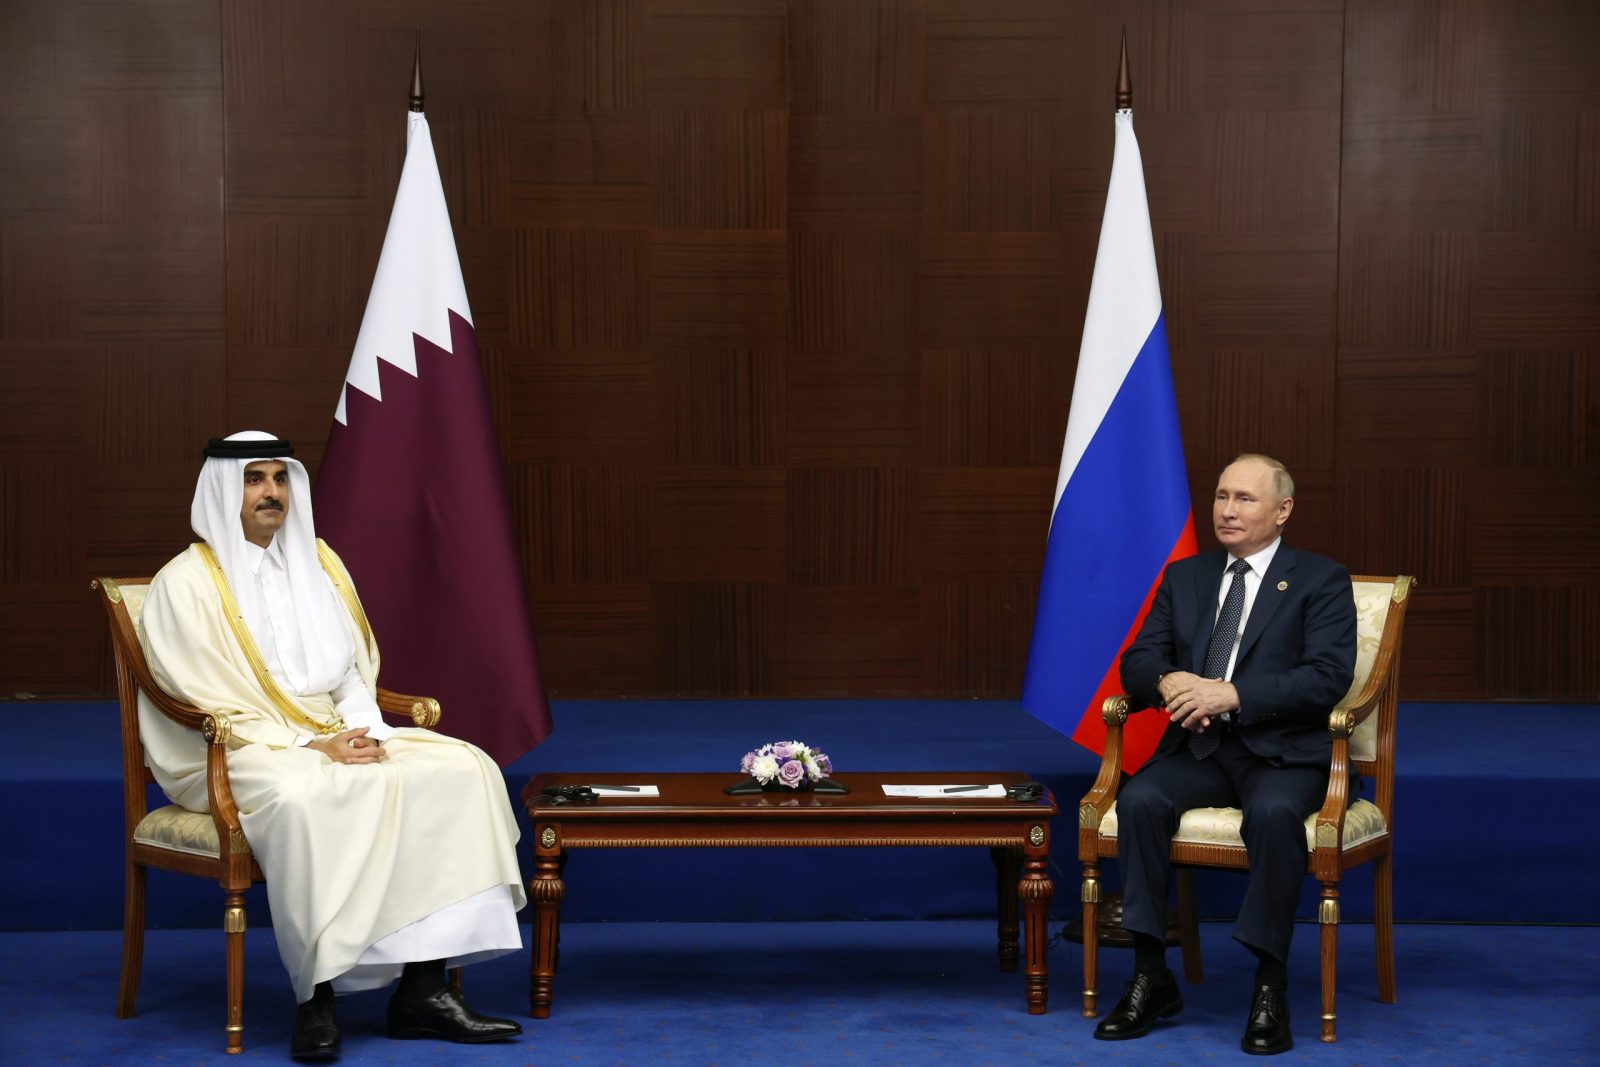 epa10240257 Emir of Qatar Sheikh Tamim Bin Hamad Al-Thani (L) and Russian President Vladimir Putin (R) attend a meeting on the sidelines of the 6th Summit of the Conference on Interaction and Confidence Building Measures in Asia (CICA) in Astana, Kazakhstan, 13 October 2022.  EPA/VYACHESLAV PROKOFIYEV / KREMLIN / SPUTNIK  POOL MANDATORY CREDIT